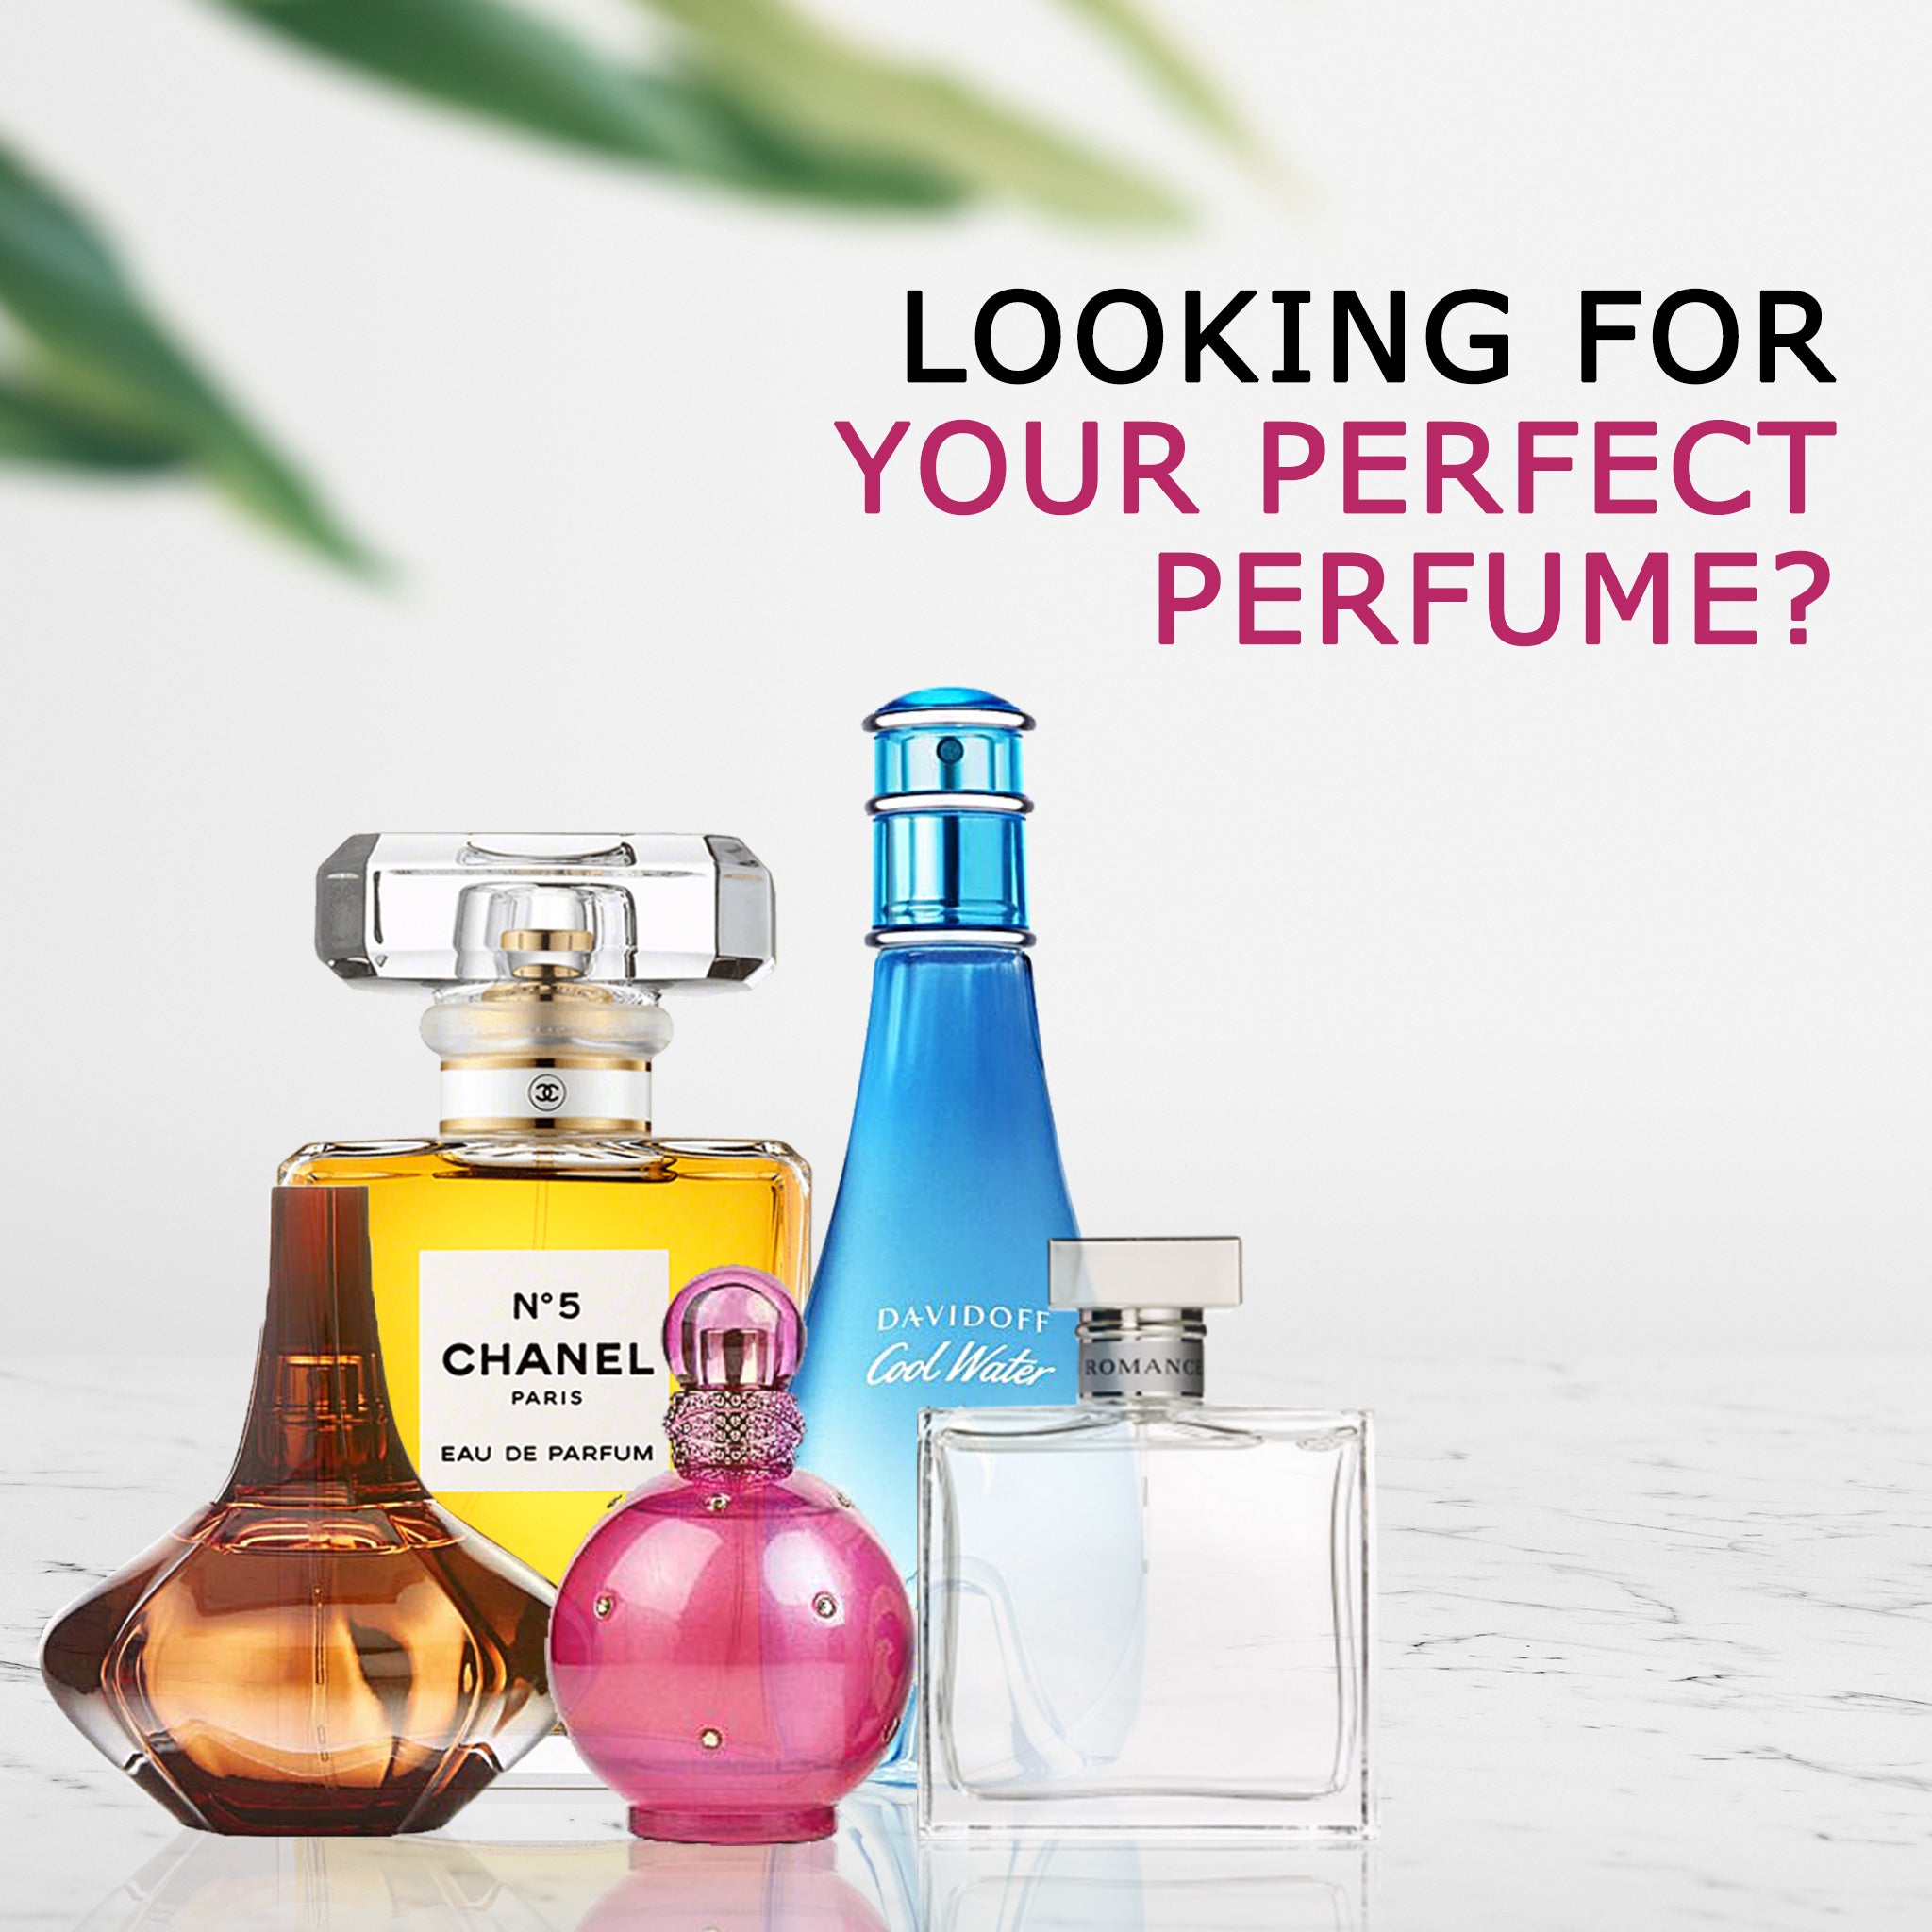 HAVE YOU FOUND YOUR PERFECT PERFUME?